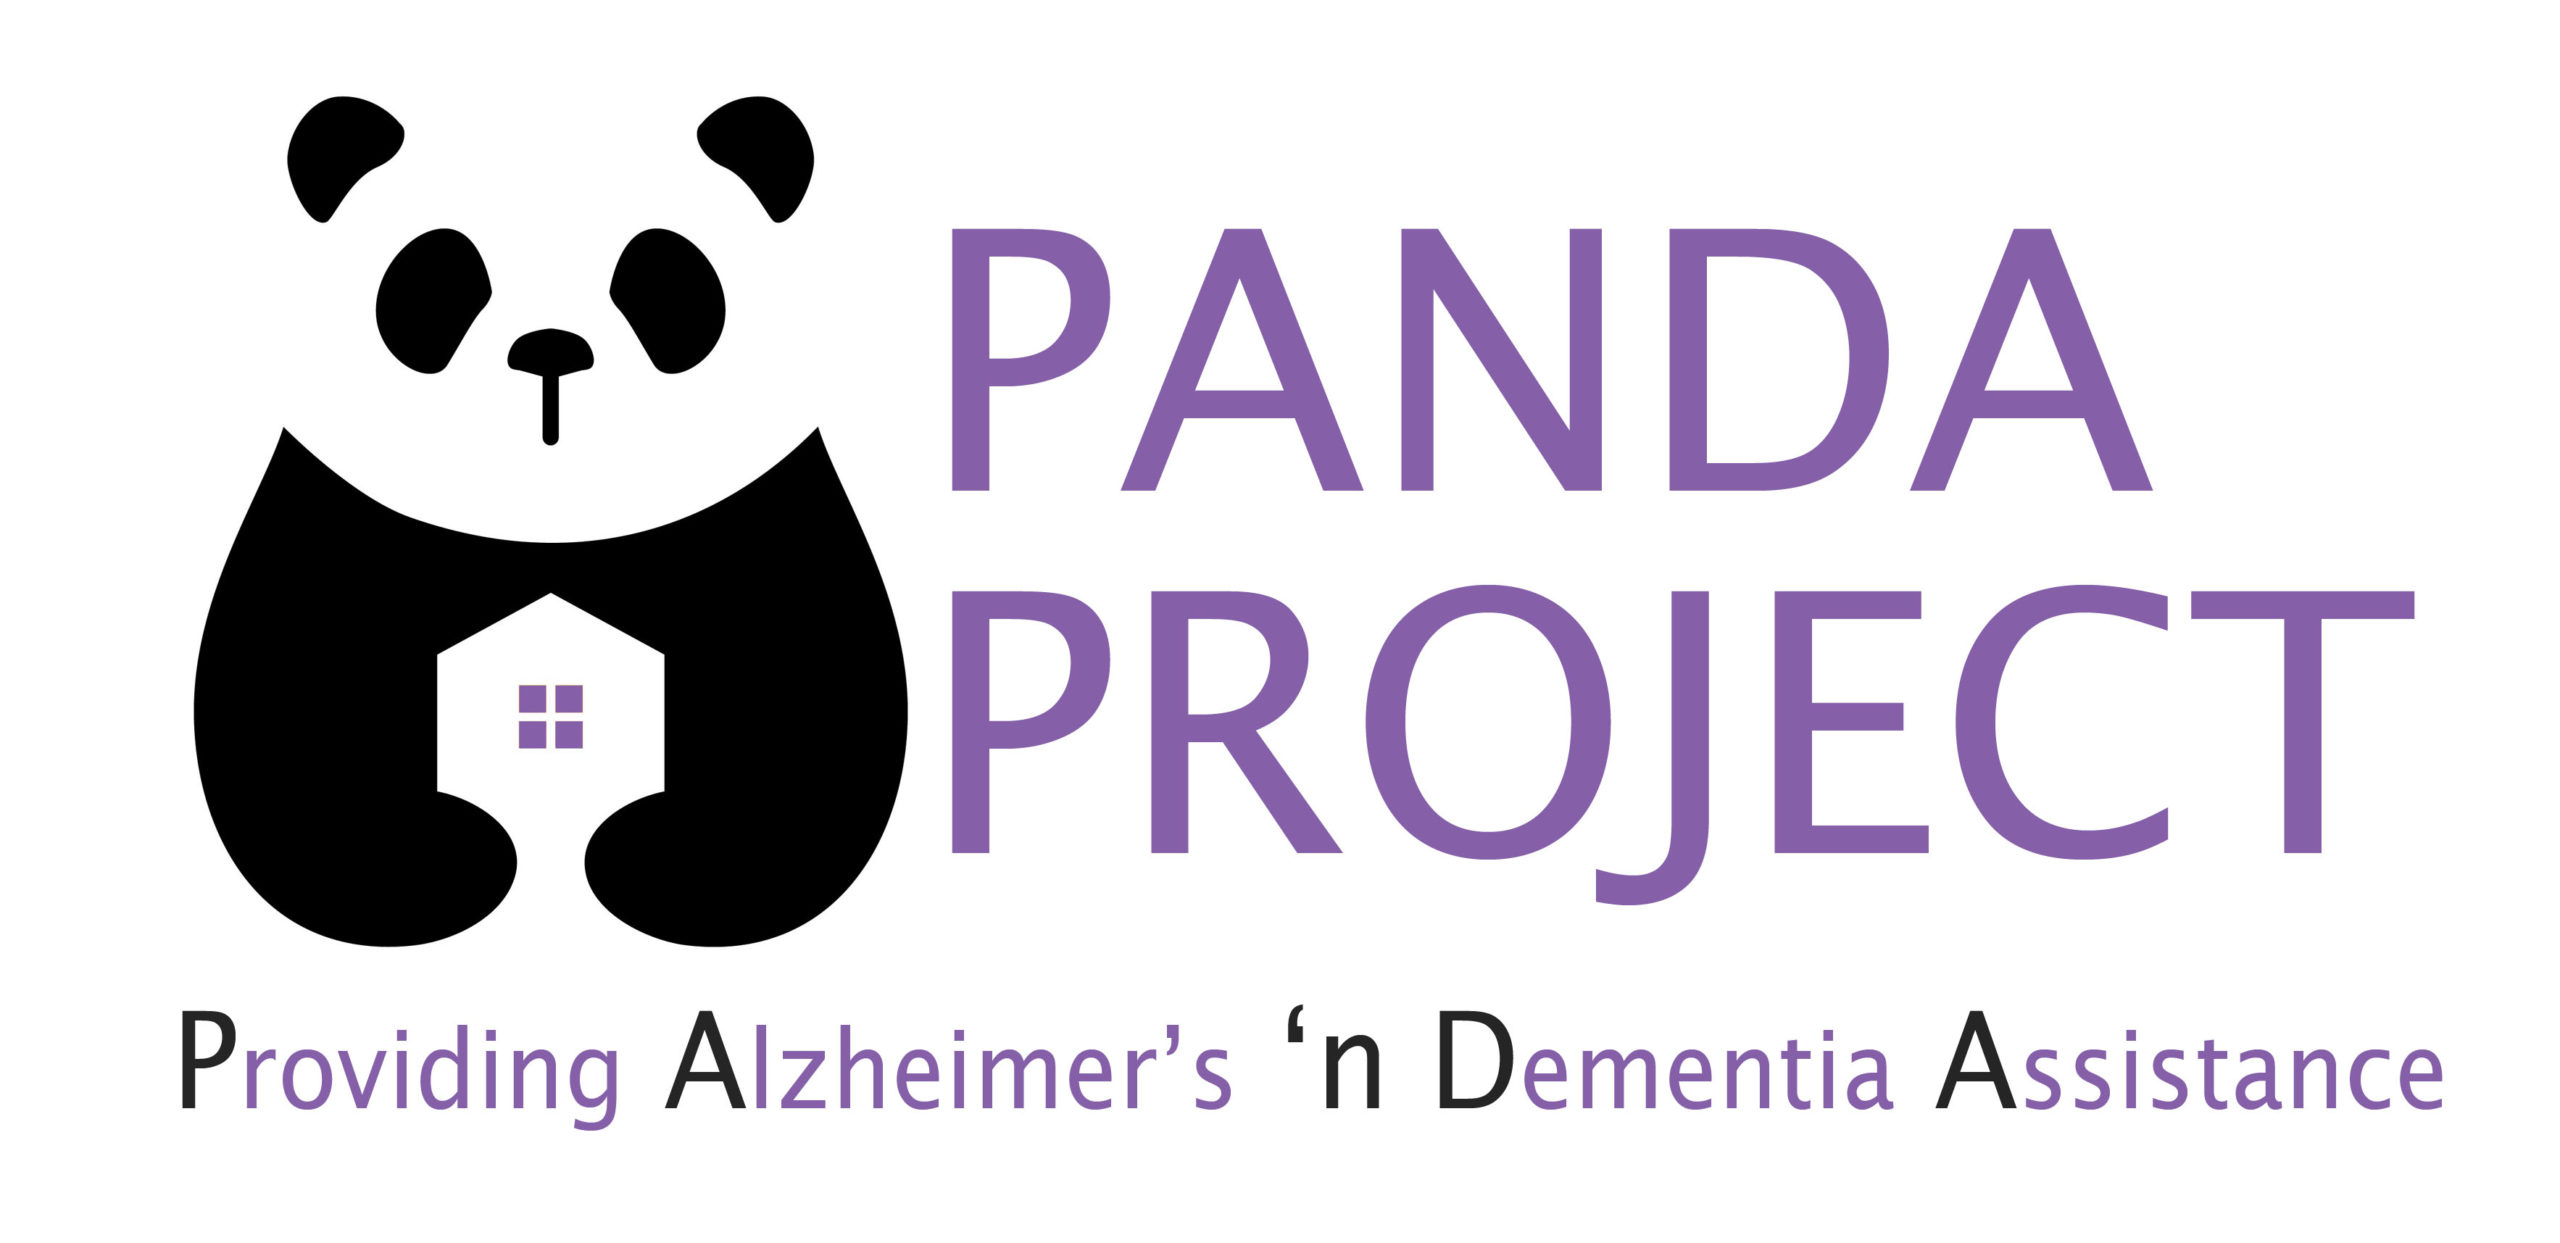 CarePredict partners with M4A on the PANDA Project